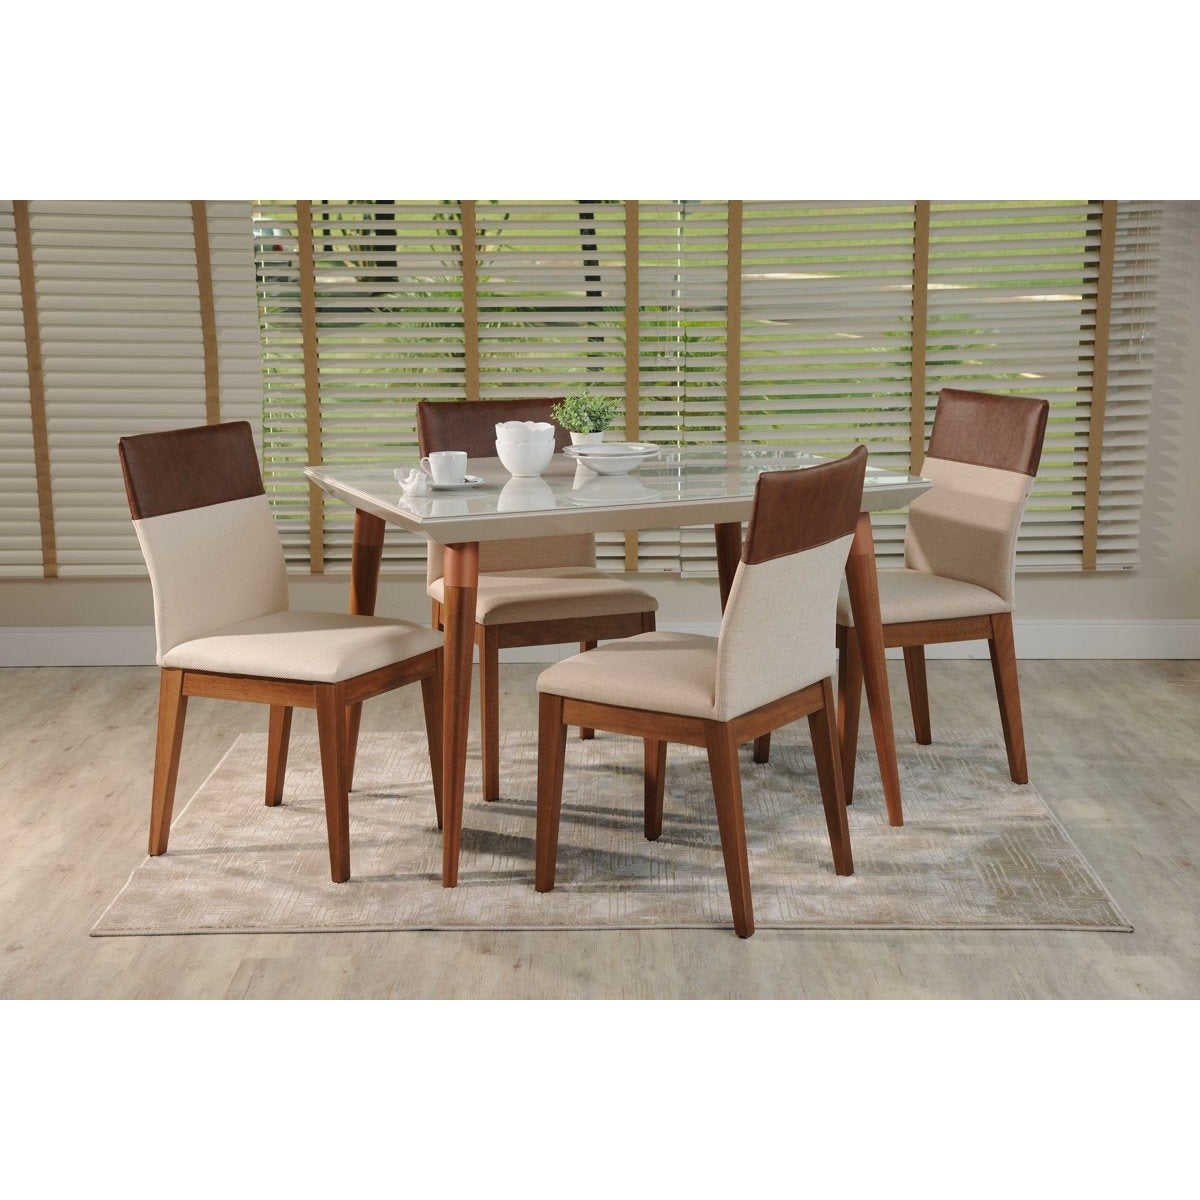 Manhattan Comfort 5-Piece Utopia 47.24" and Duke Dining Set with 4 Dining Chairs in Off White and Dark Beige and Brown-Minimal & Modern